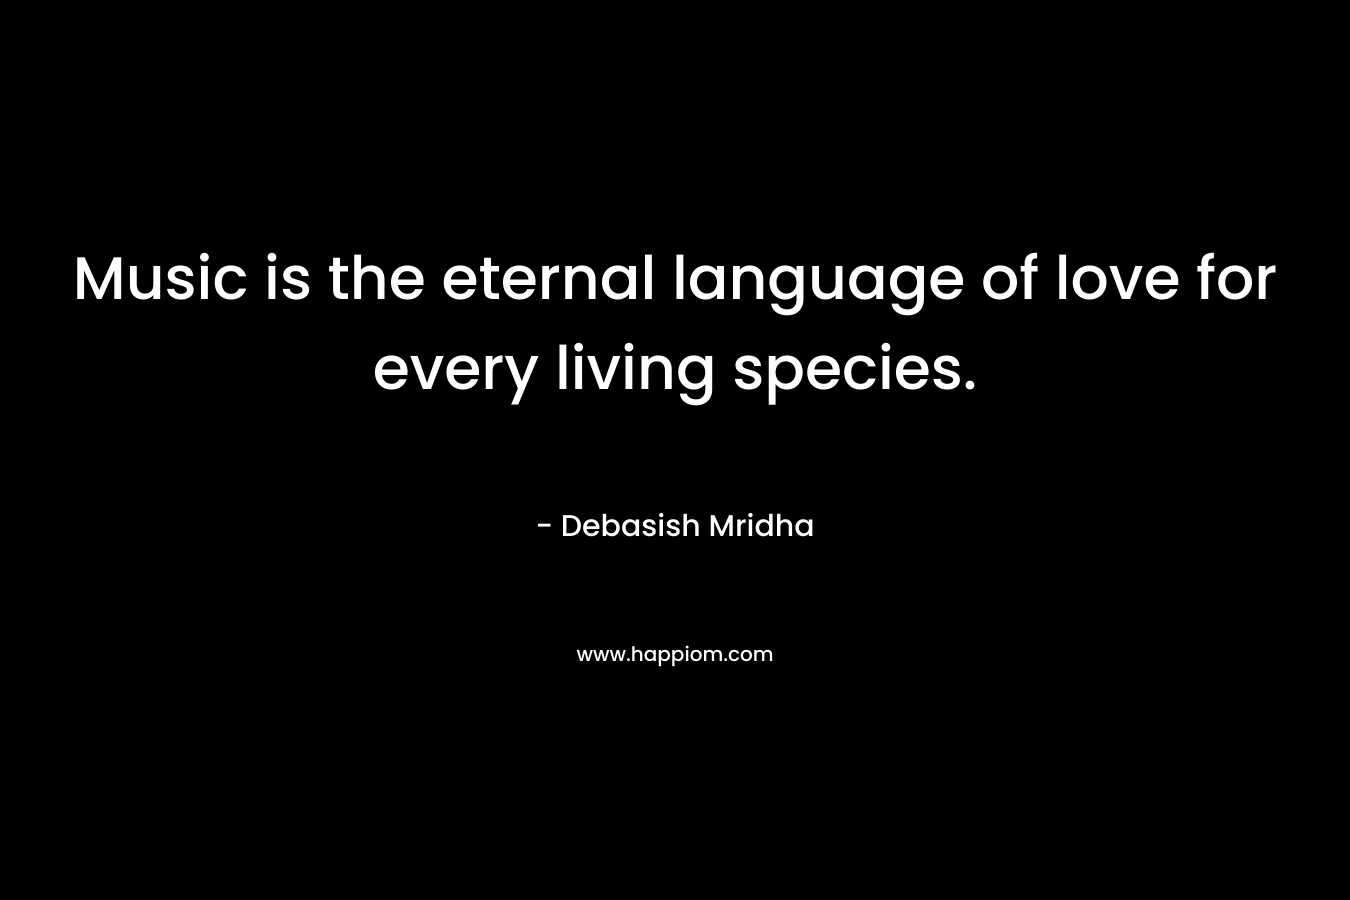 Music is the eternal language of love for every living species.